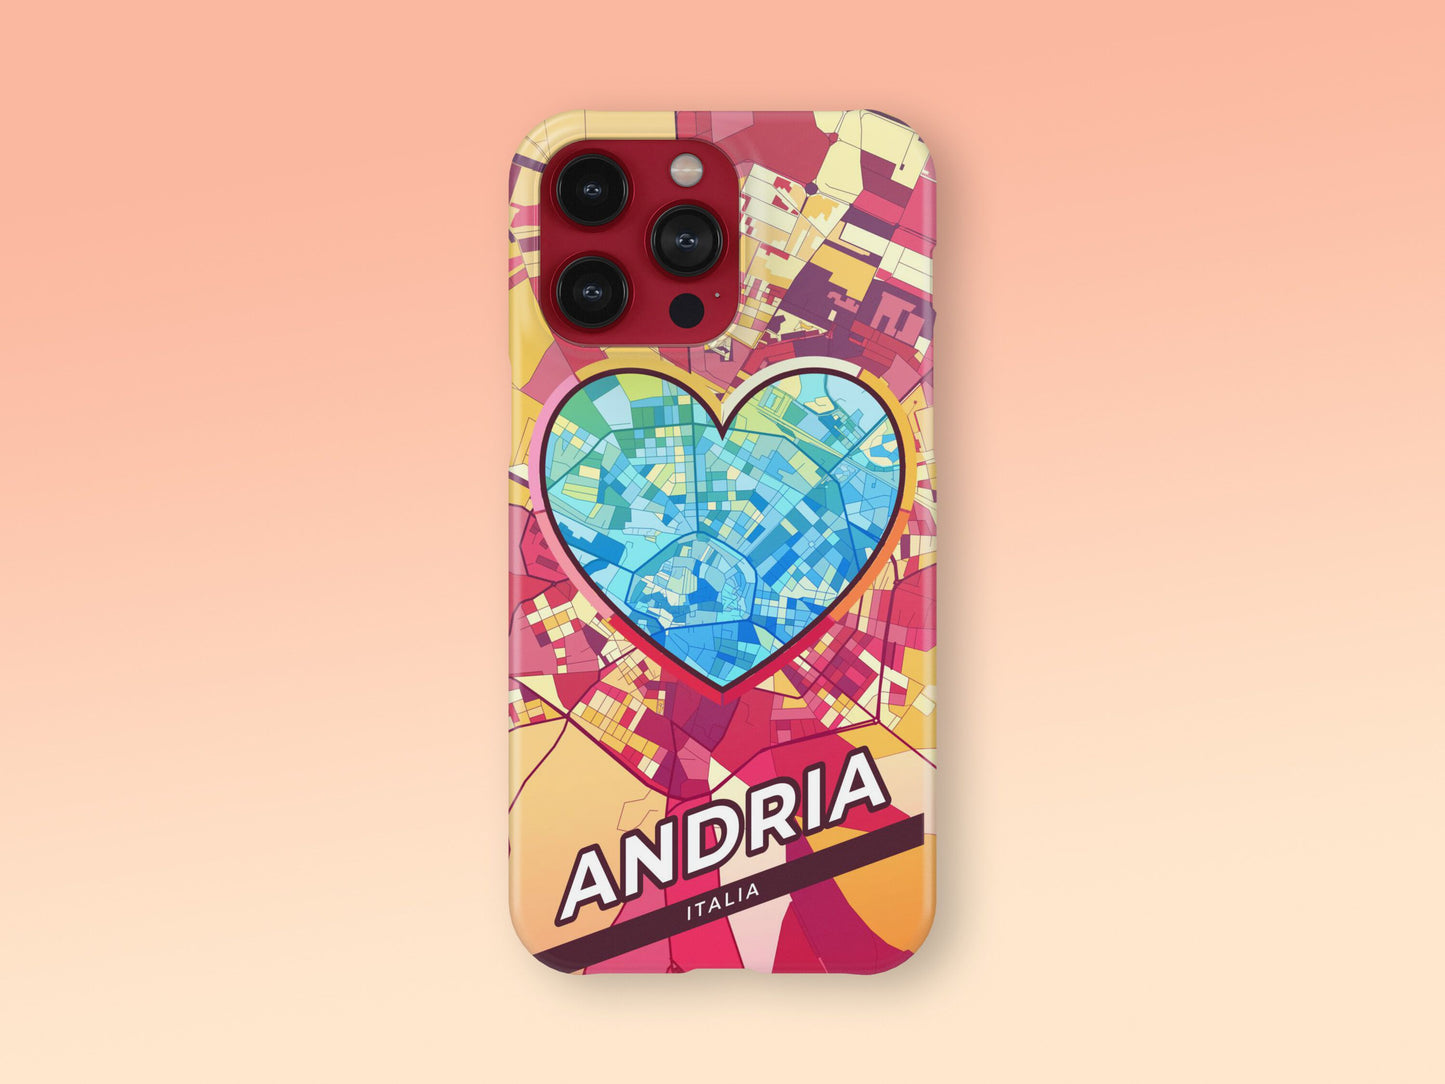 Andria Italy slim phone case with colorful icon. Birthday, wedding or housewarming gift. Couple match cases. 2